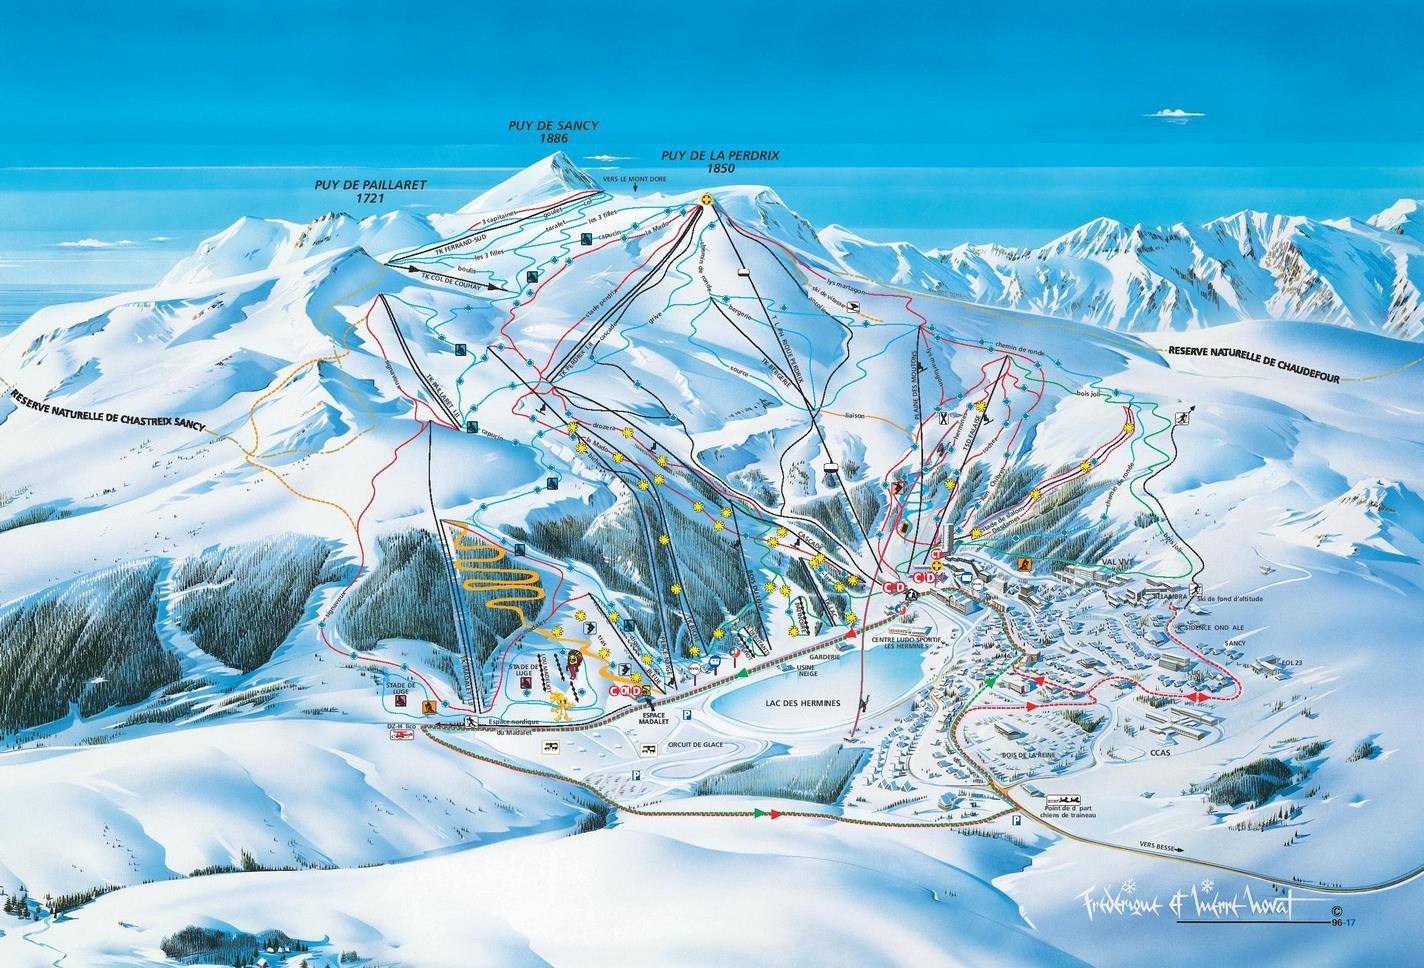 Chalet L'Anorak in Super Besse - Map of the resort's slopes